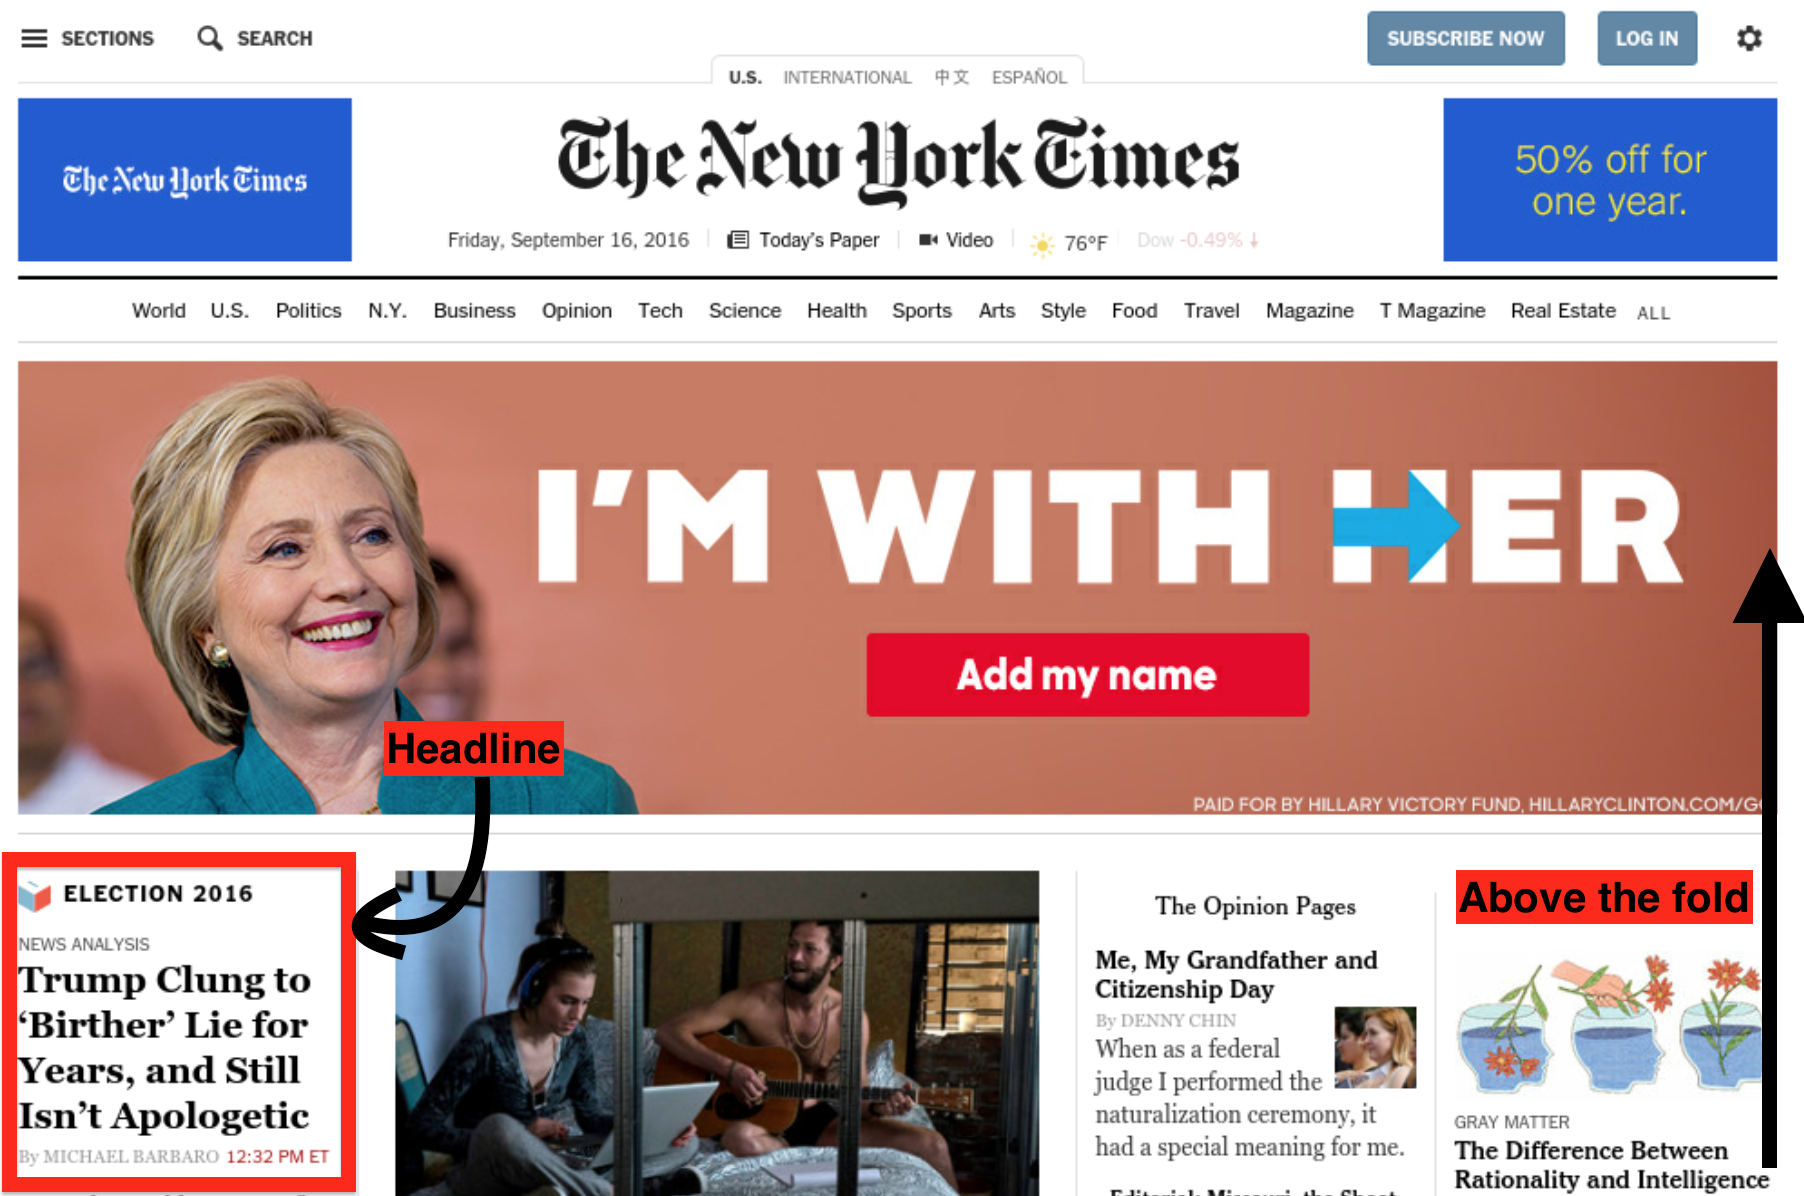 Example NYT screenshot from September 16th